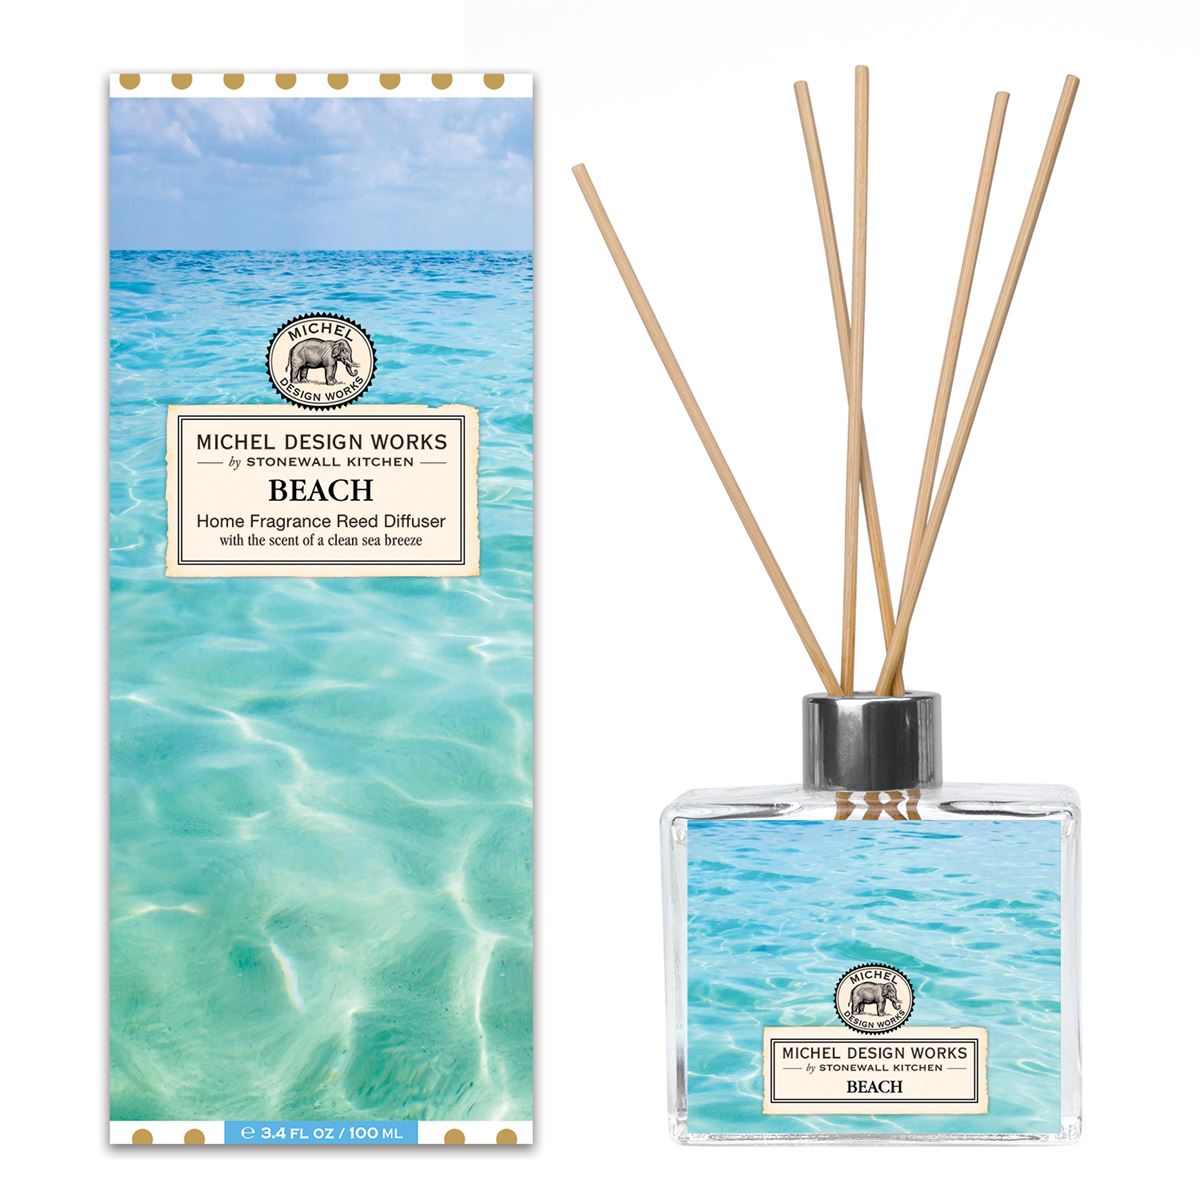 Michel Design Works - Beach Home Fragrance Reed Diffuser